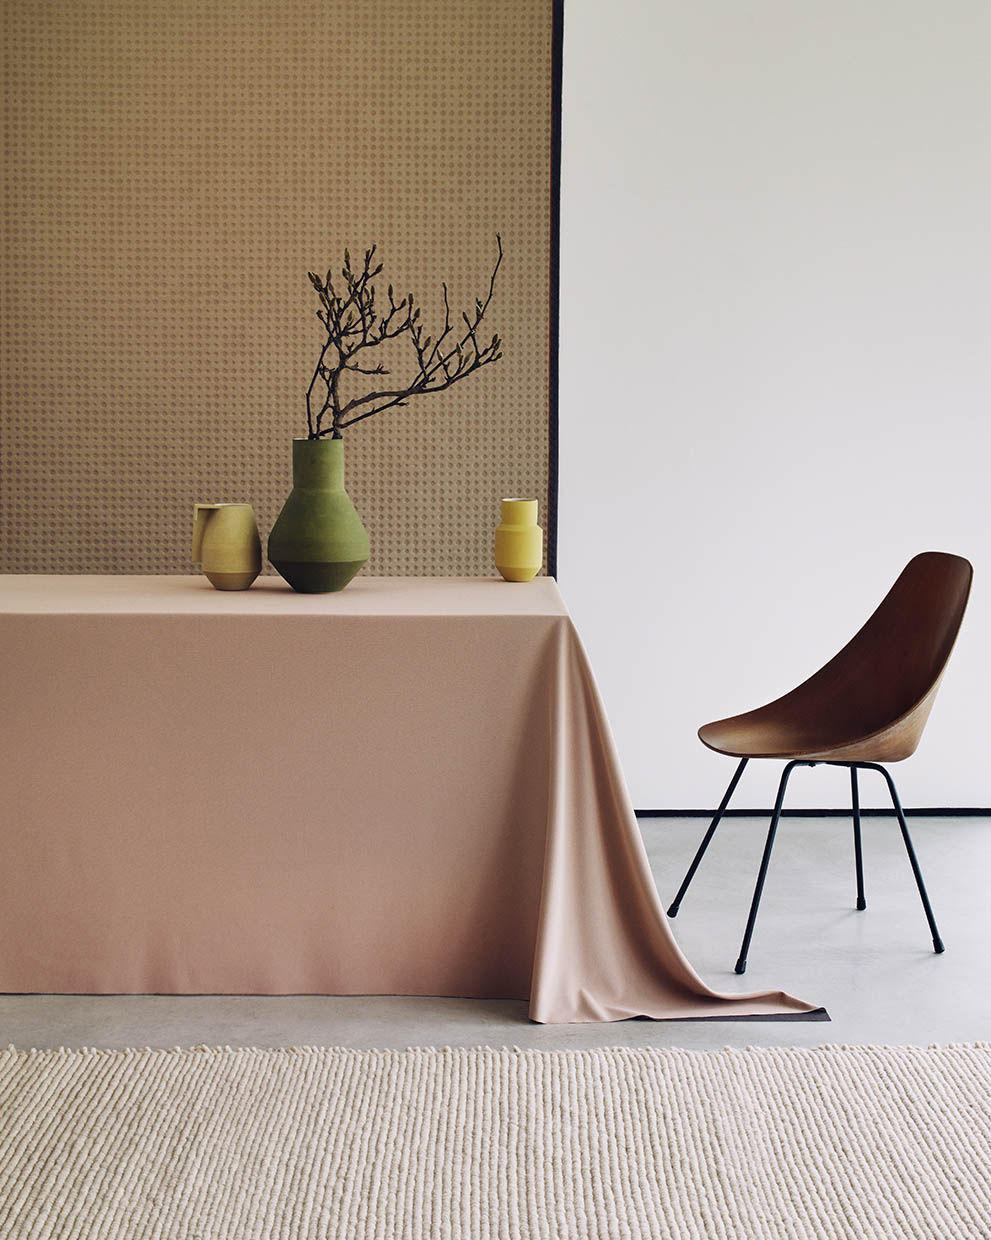 Interior styling by Sania Pell for Kvadrat, photographer Beth Evans